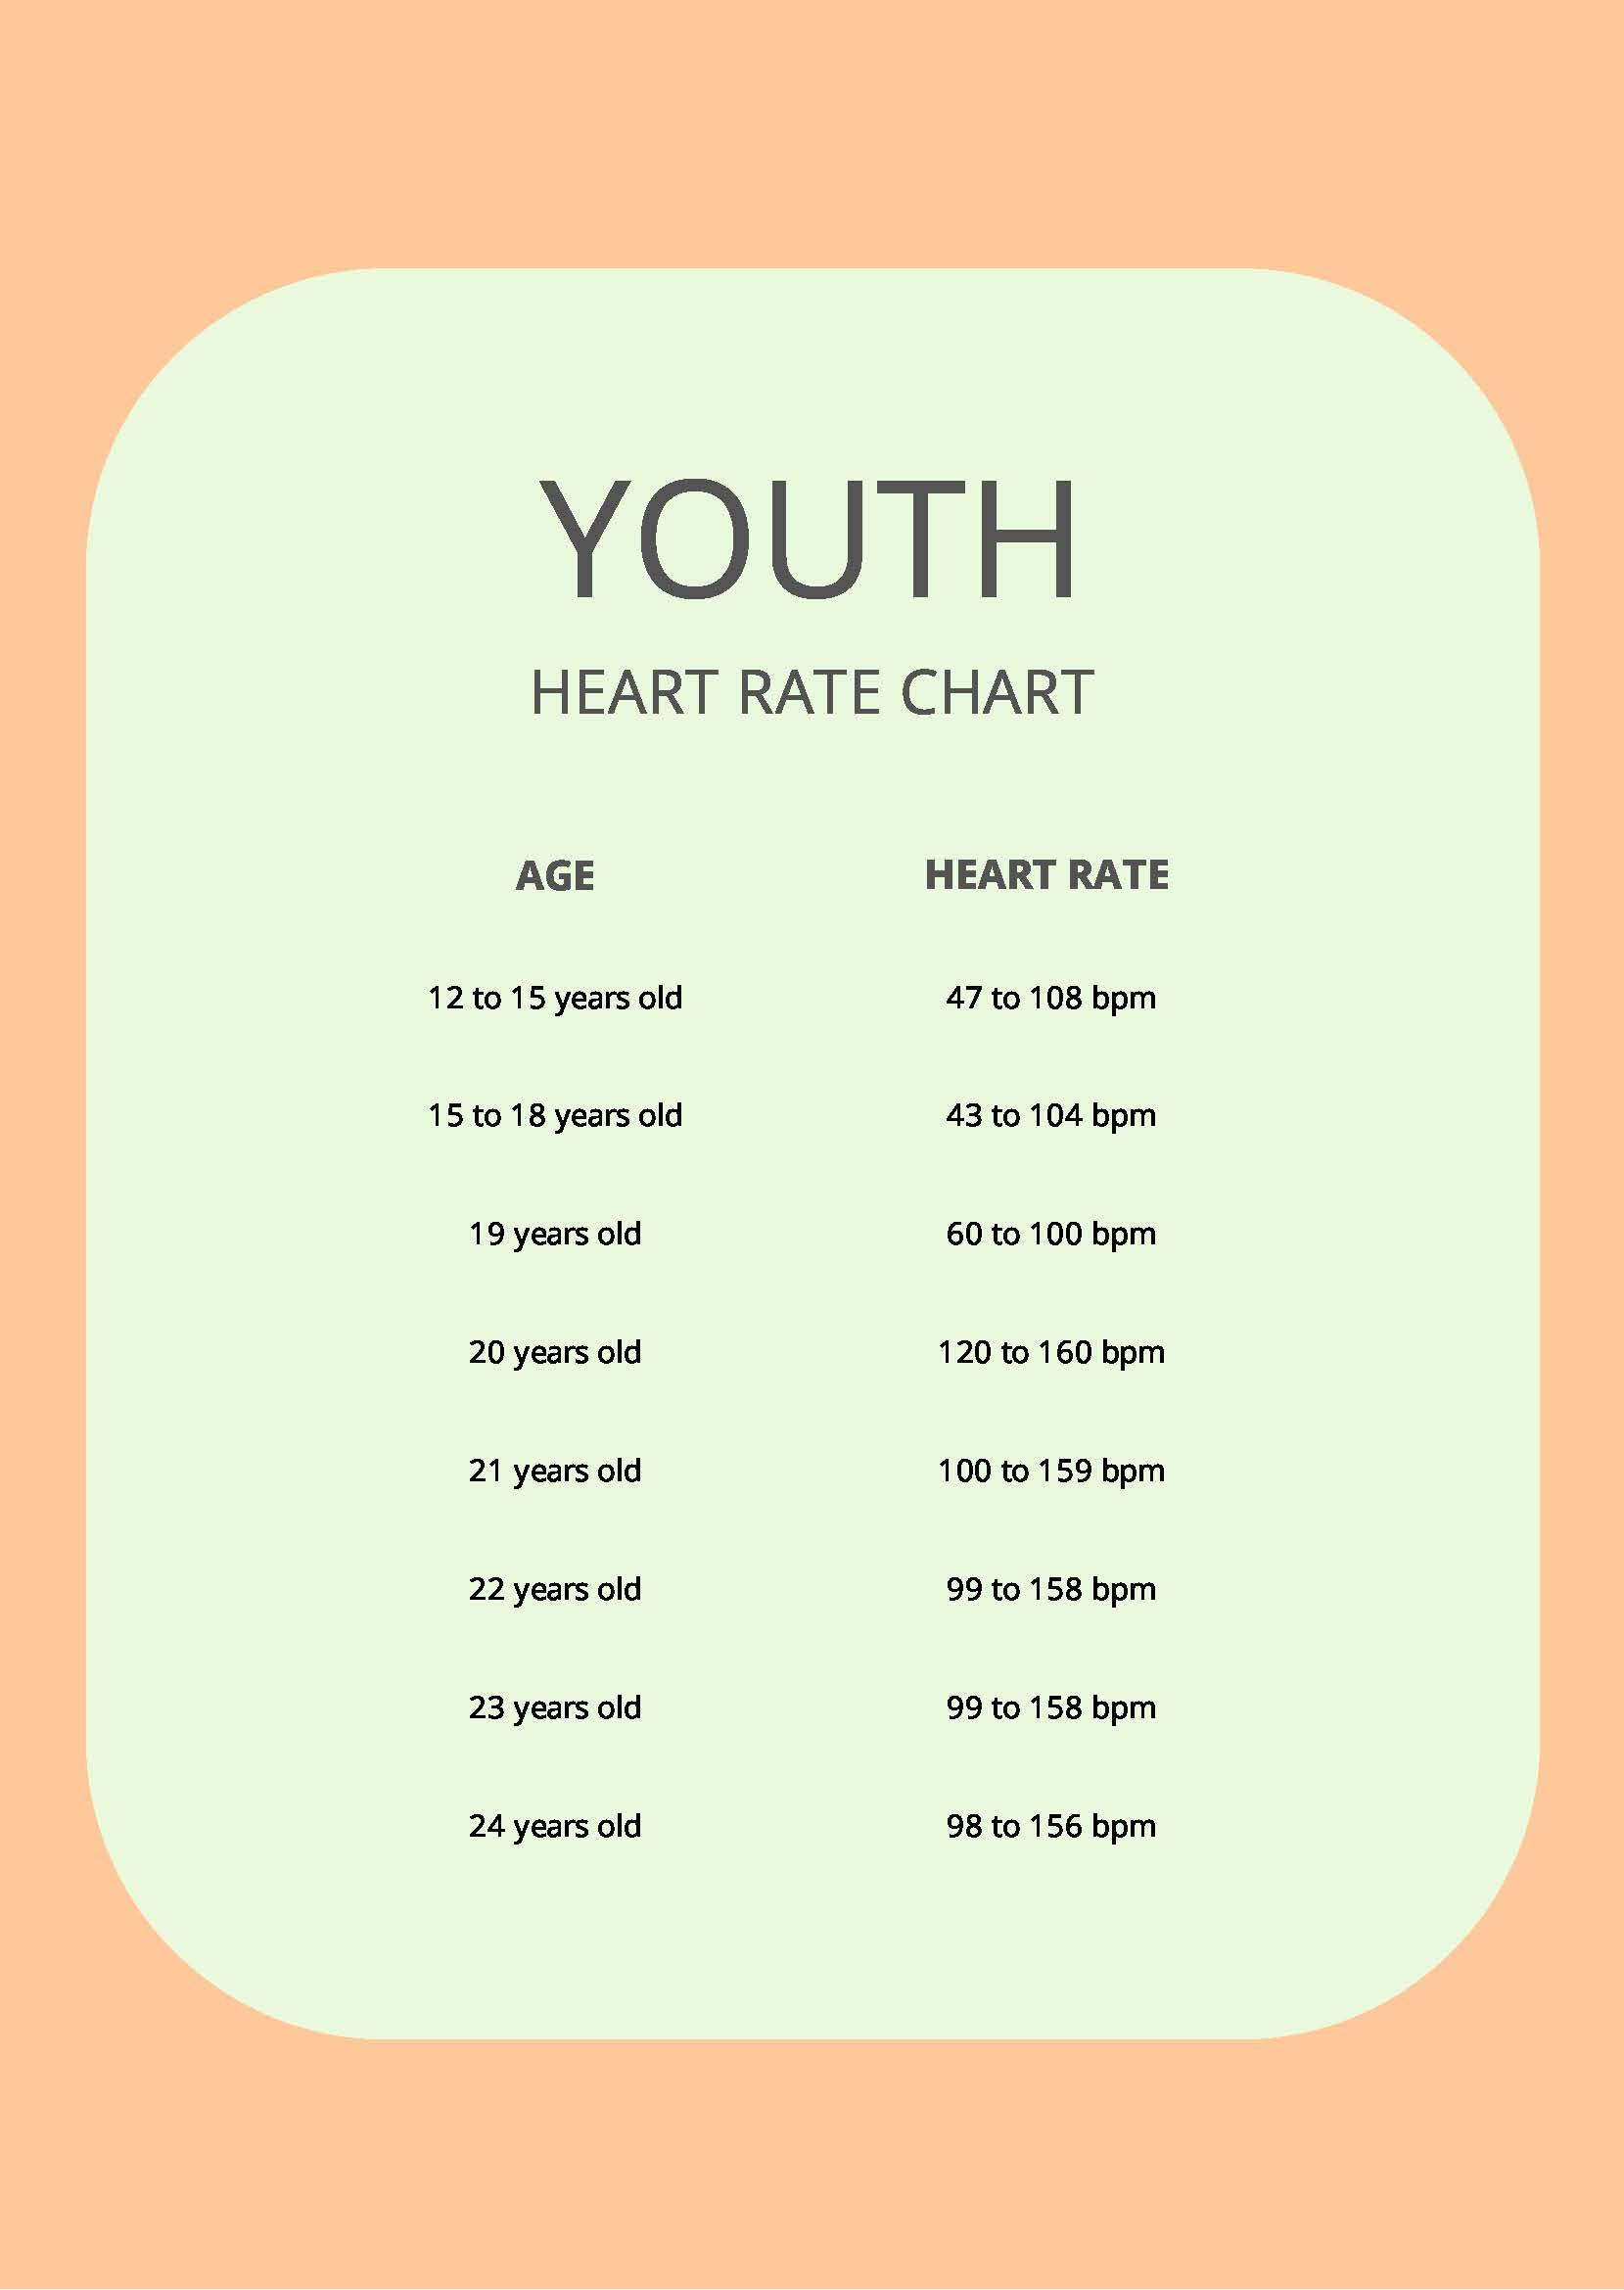 Youth Heart Rate Chart in PDF